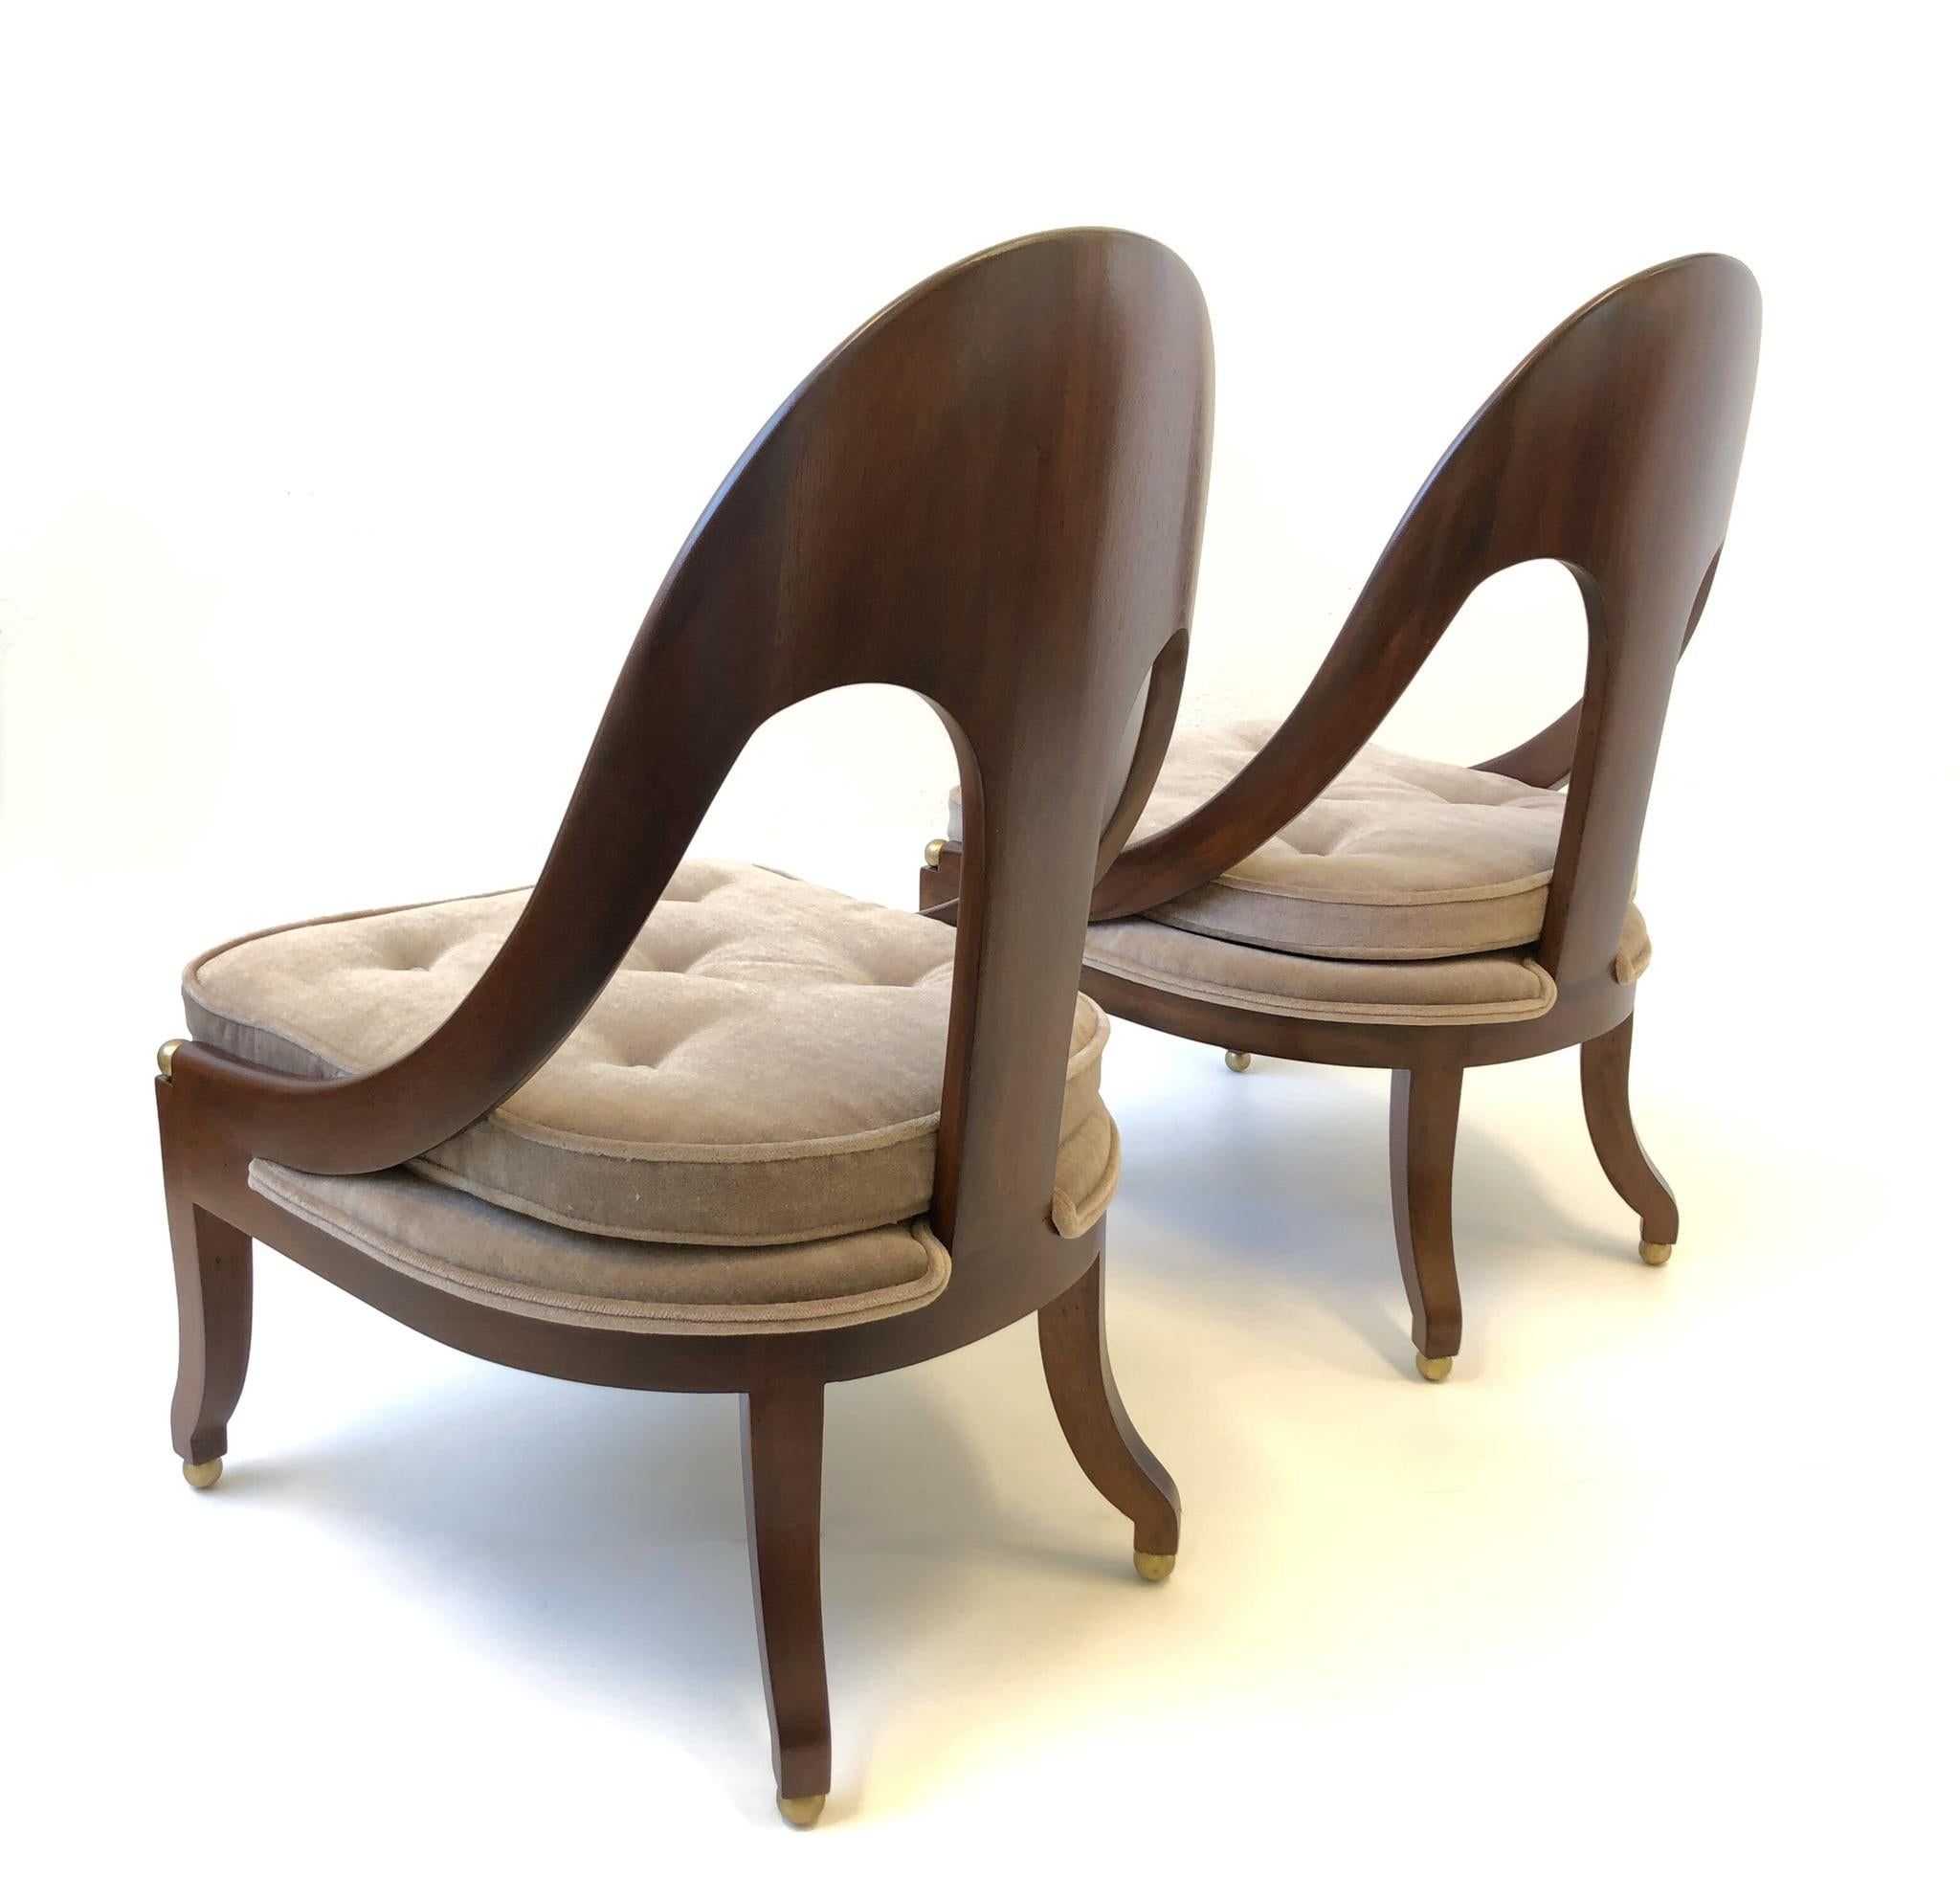 Mid-20th Century Pair of Mahogany Spoon Back Slipper Lounge Chairs by Michael Taylor for Baker